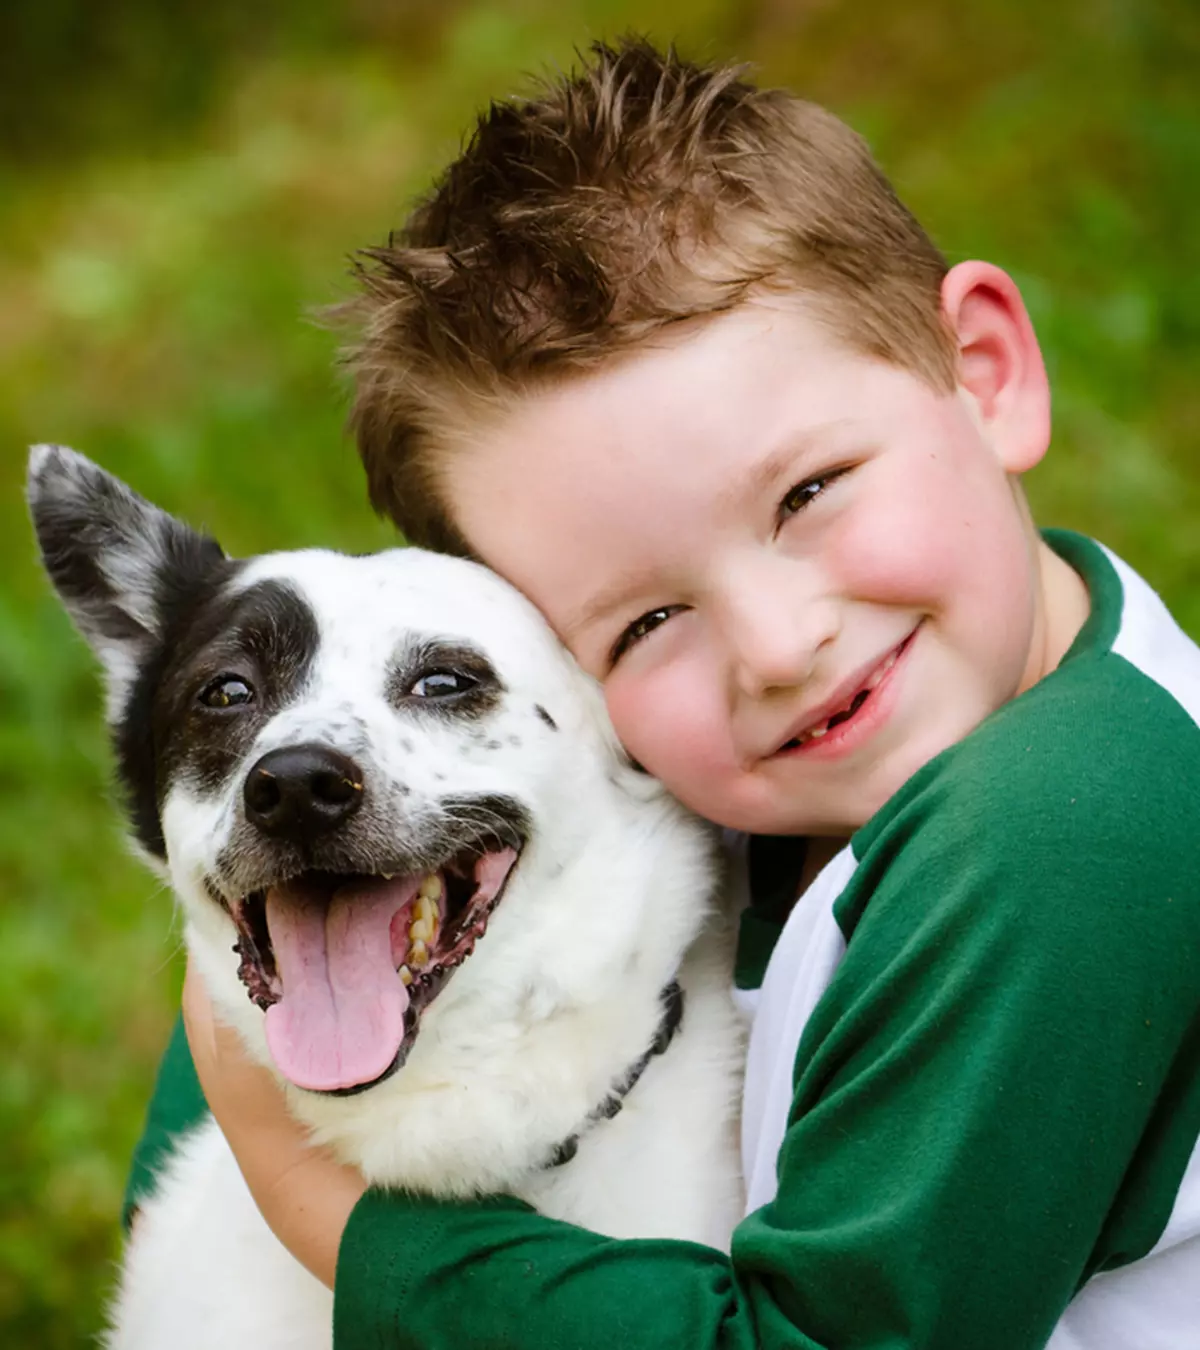 15 Short And Funny Poems About Dogs For Kids